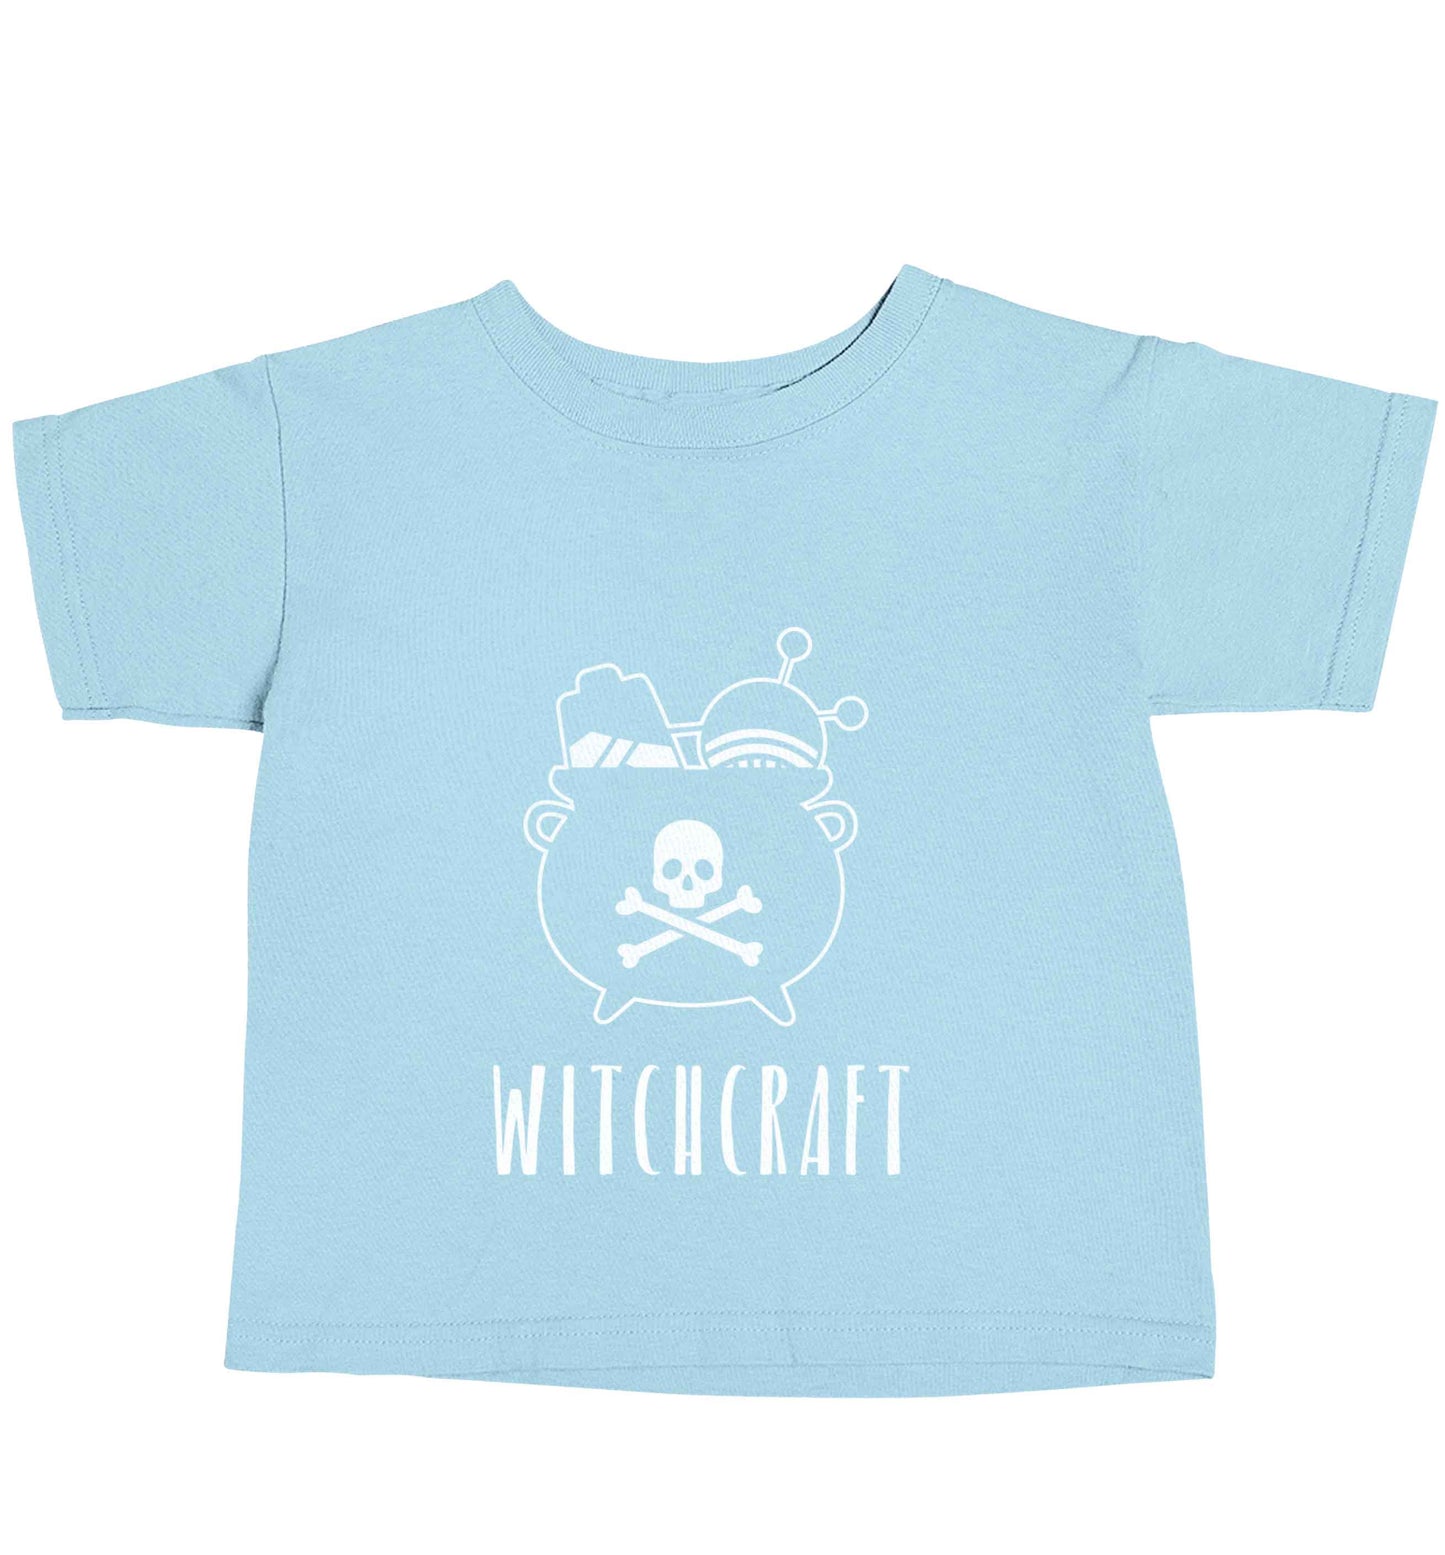 Witchcraft light blue baby toddler Tshirt 2 Years